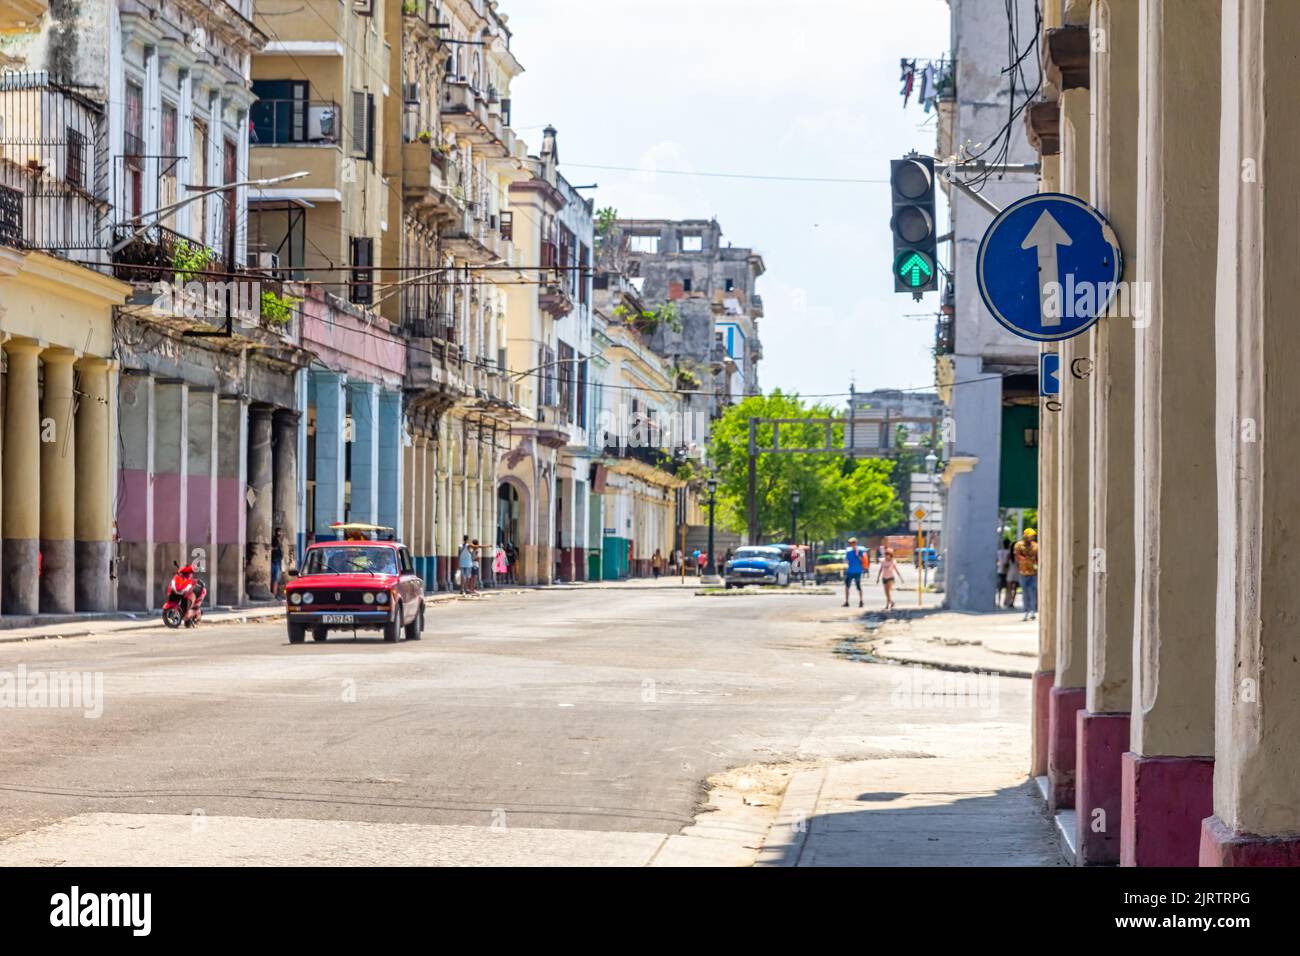 A LADA car drives in a city street where weathered building facades line up Stock Photo